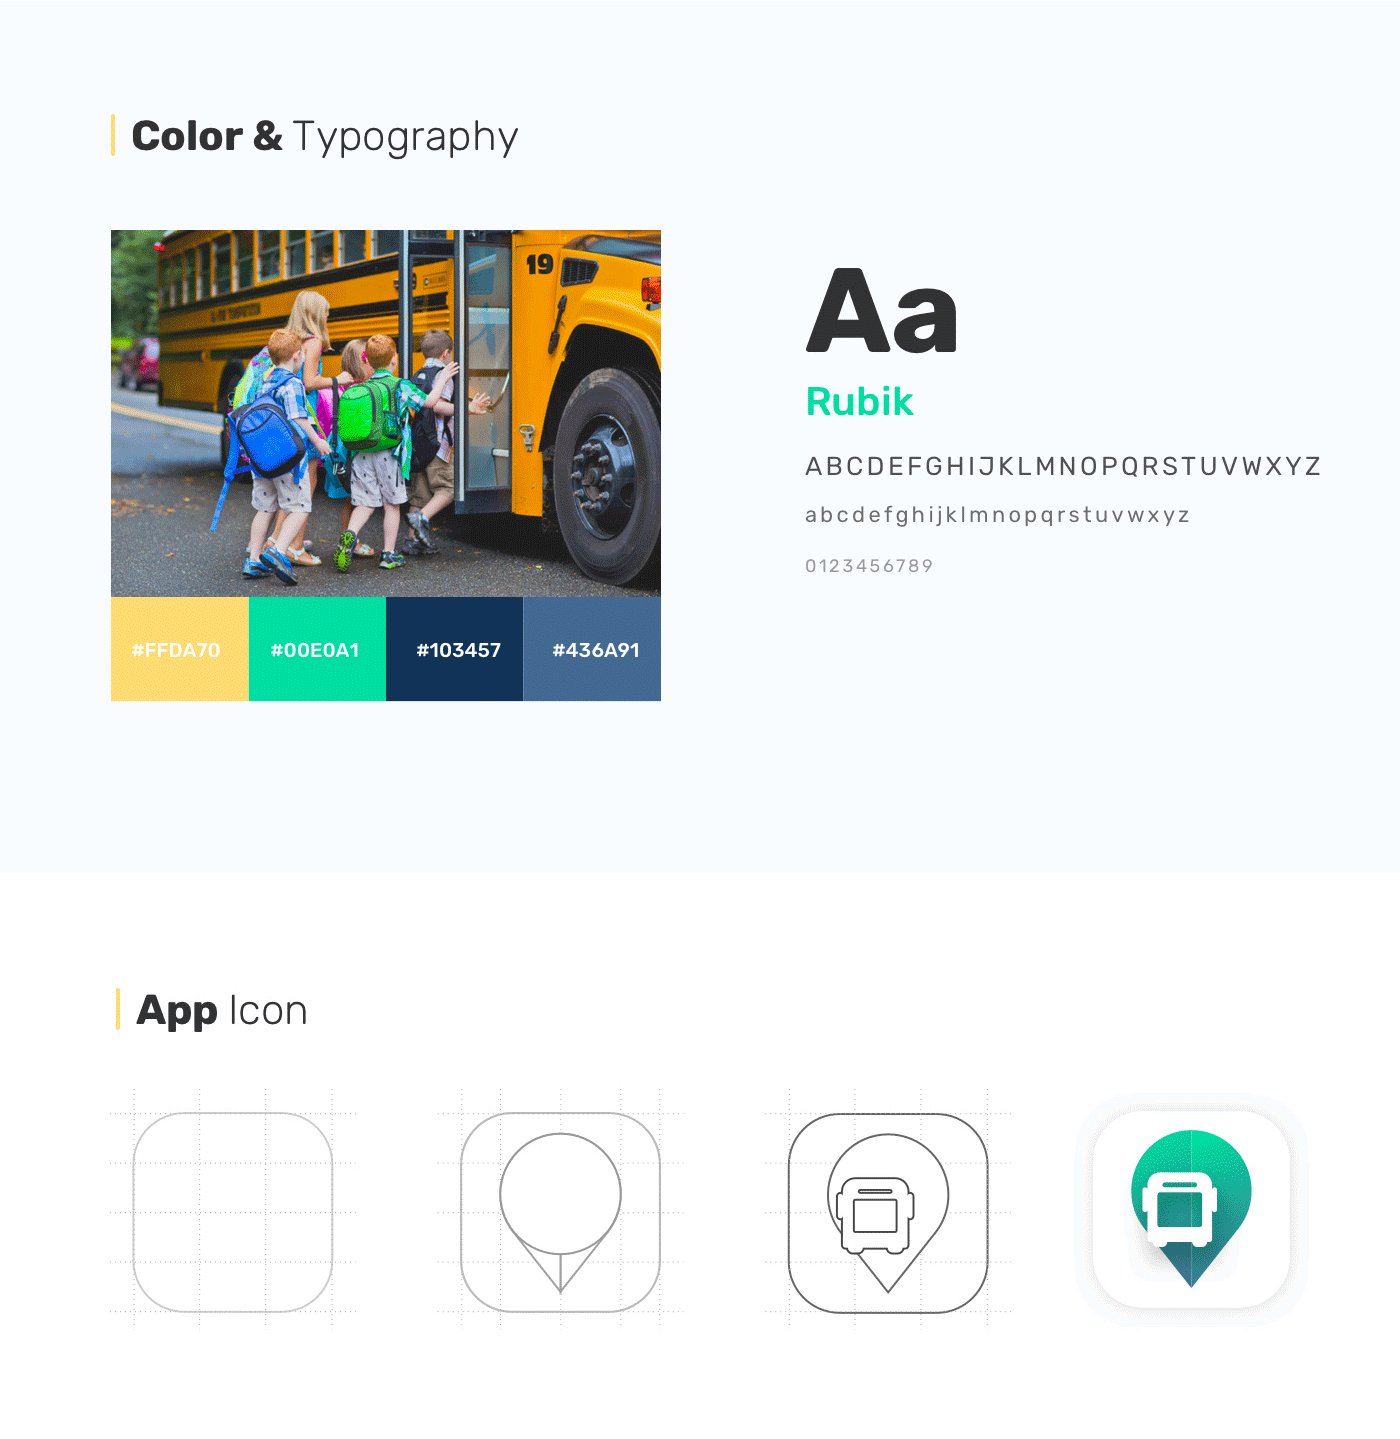 app children safety dashboard design ios location map Mobile notifications School Bus tracker ui ux Aleart